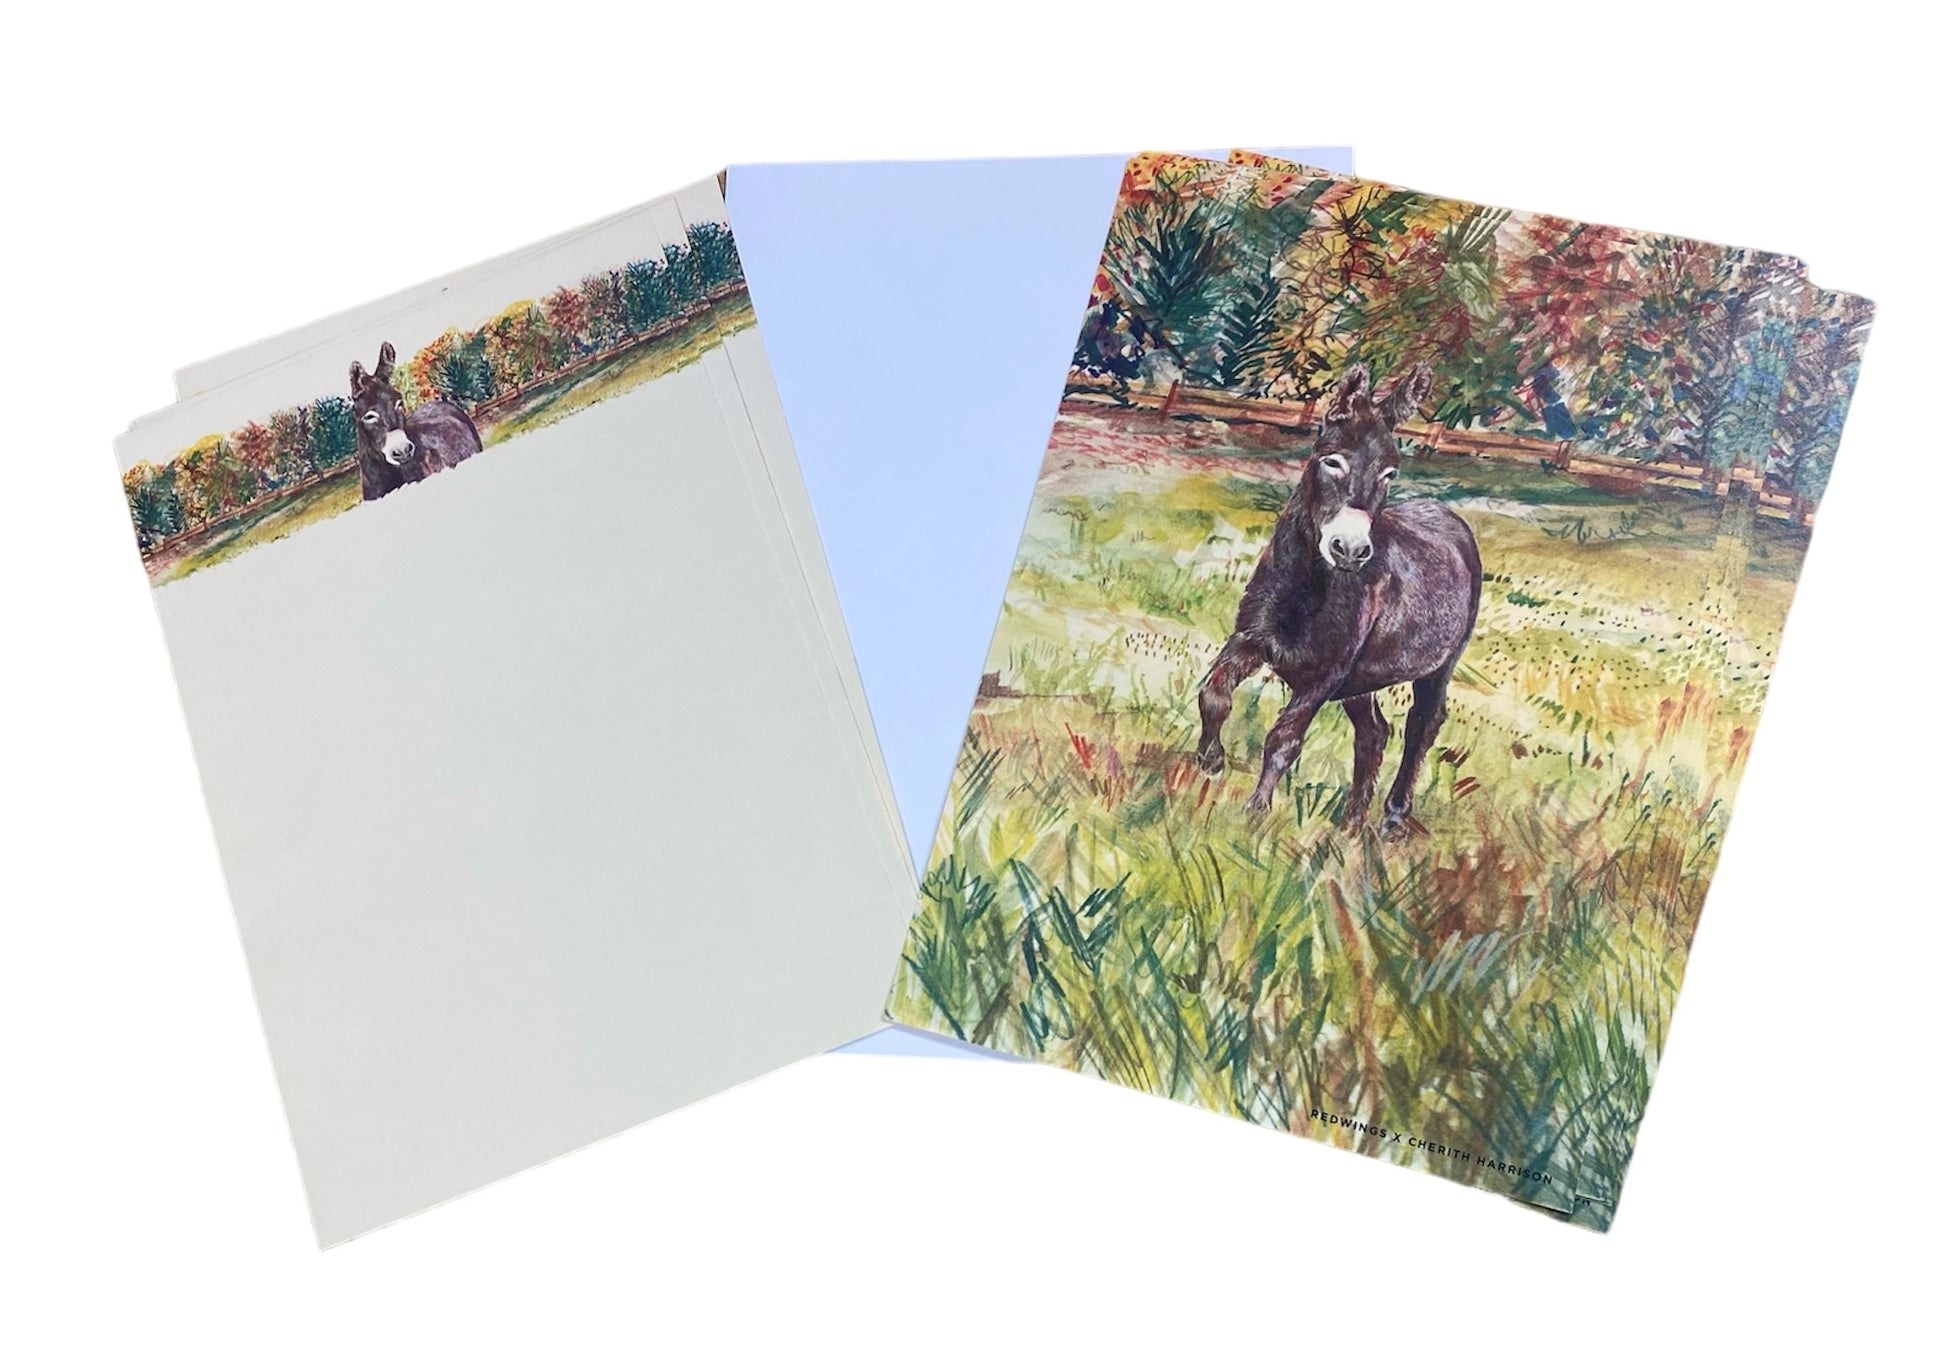 Image shows a set of beautiful illustrated sets of paper of our brown donkey called Denver standing in a field with a mixture of shades of green trees in the background. one page had the image across the top header. The other image fills the whole page.